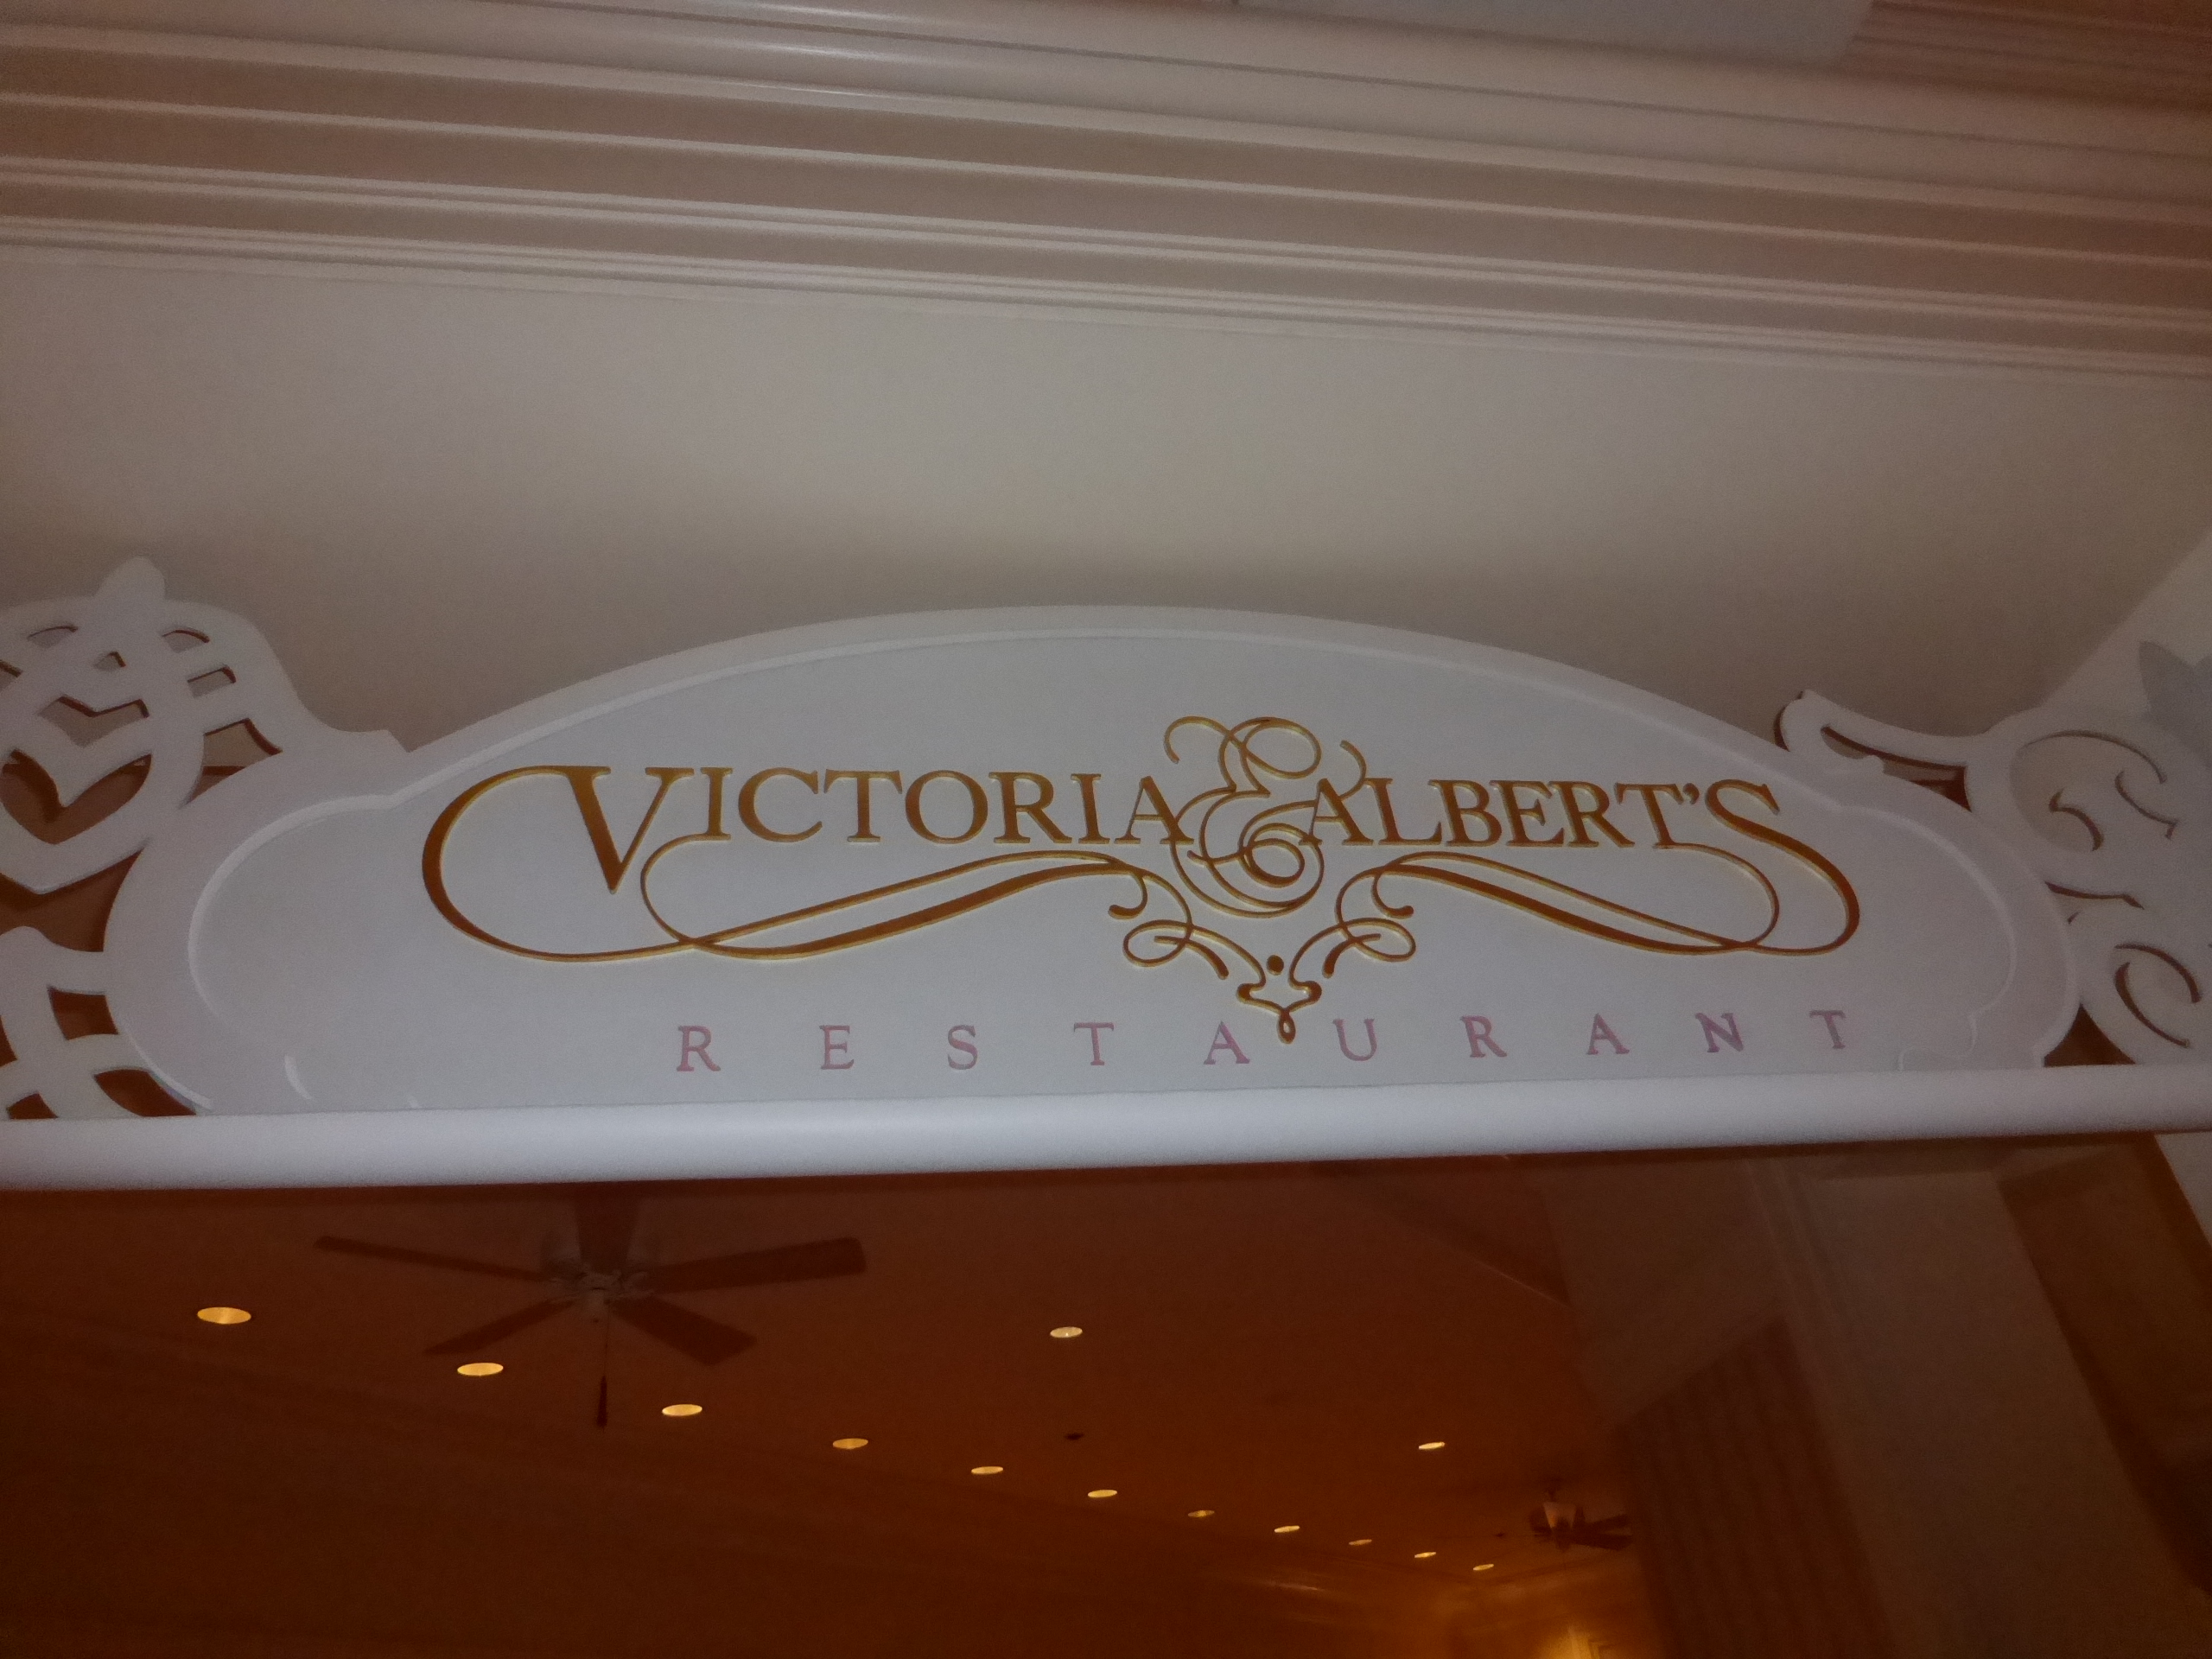 Victoria and Albert’s in the Grand Floridian – The Most Romantic Dining in Walt Disney World